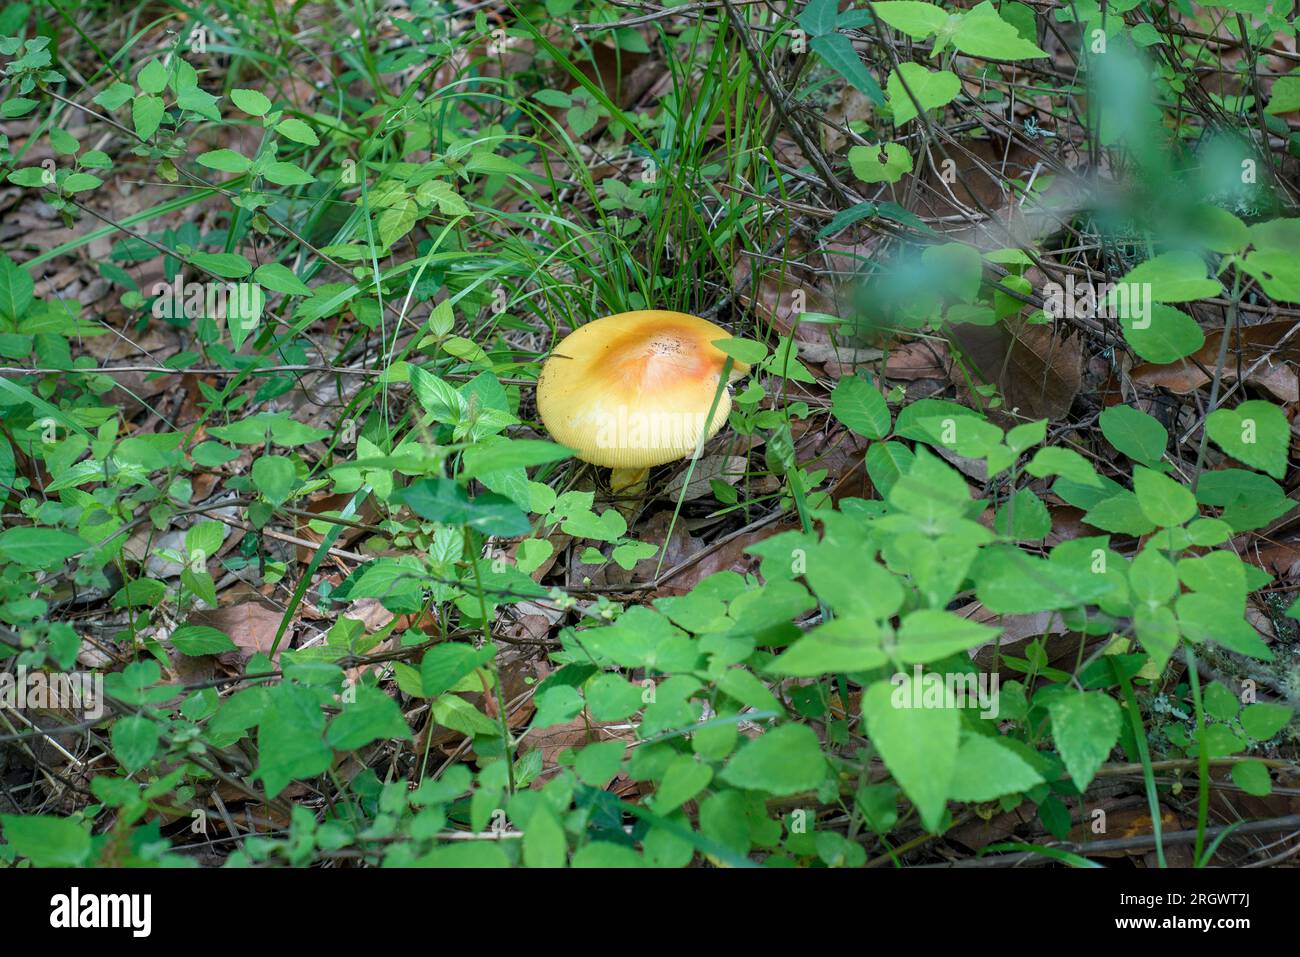 Edible mushroom in the middle of the forest. Stock Photo